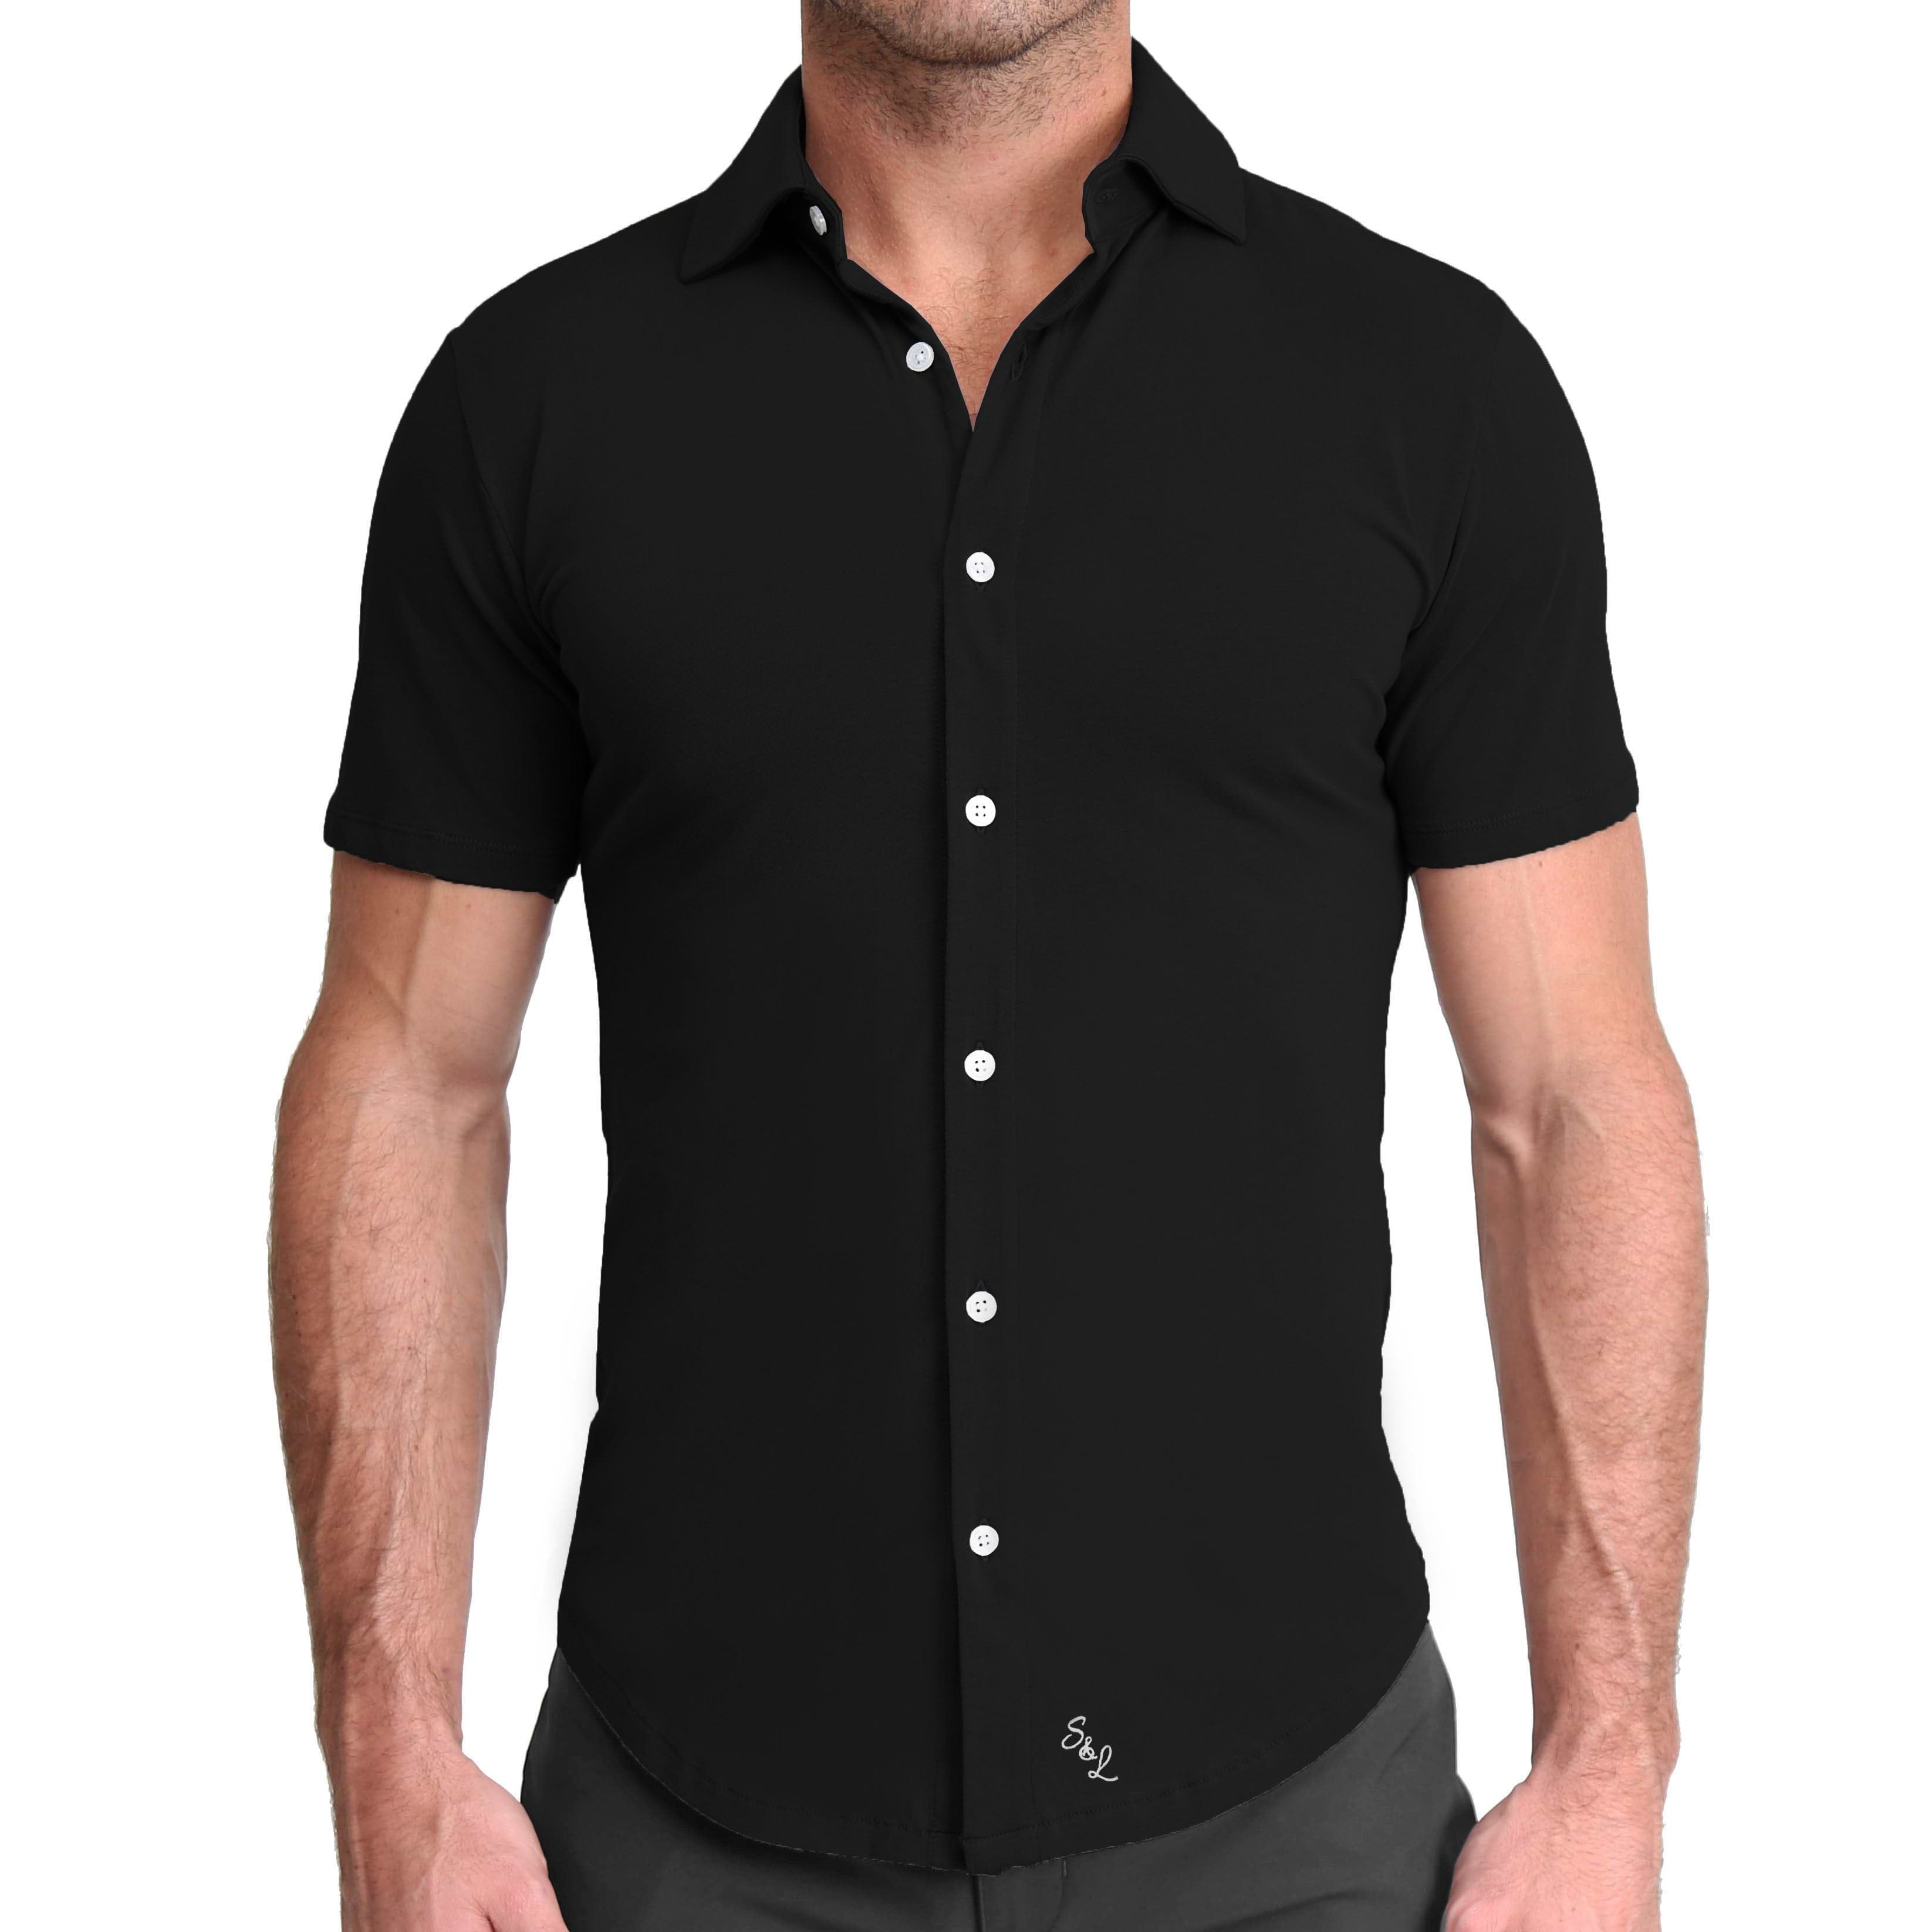 "The Roth" Black Short Sleeve Button Down